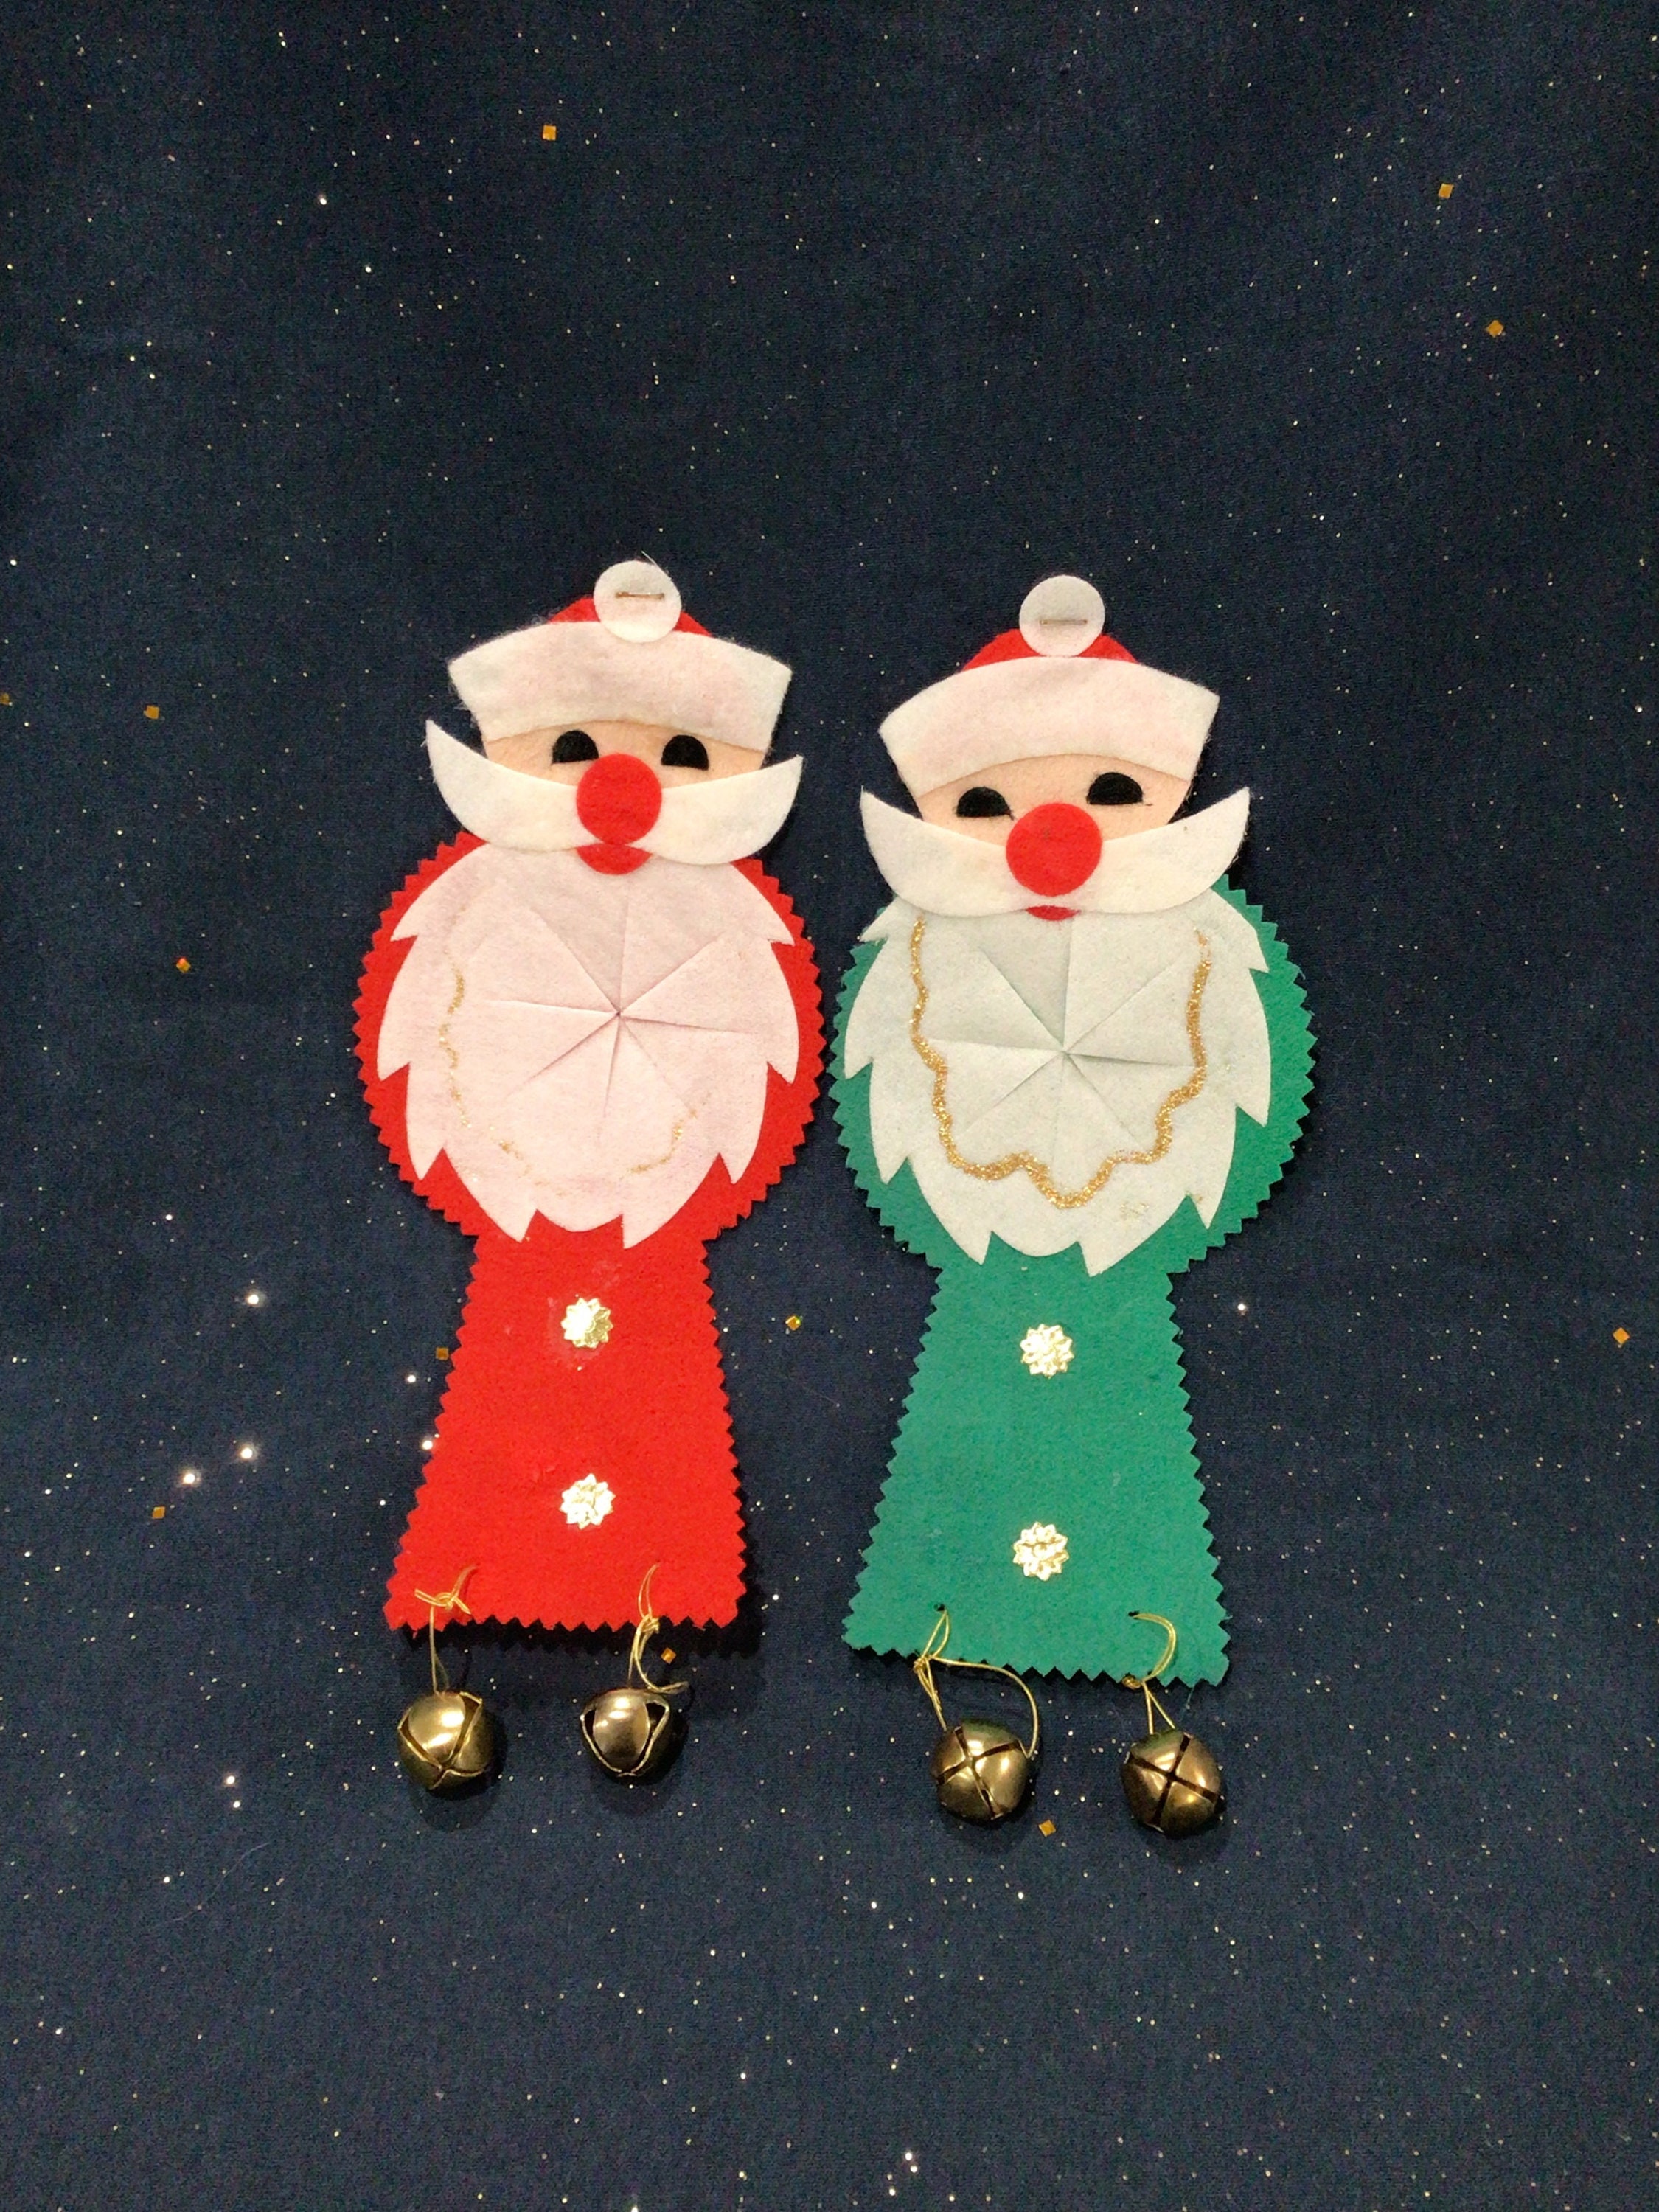 Rbckvxz Christmas Decorations Under Clearance, Christmas Door Hanger Decorations Cute Holiday Decorations Indoor Door Knob Merry Christmas